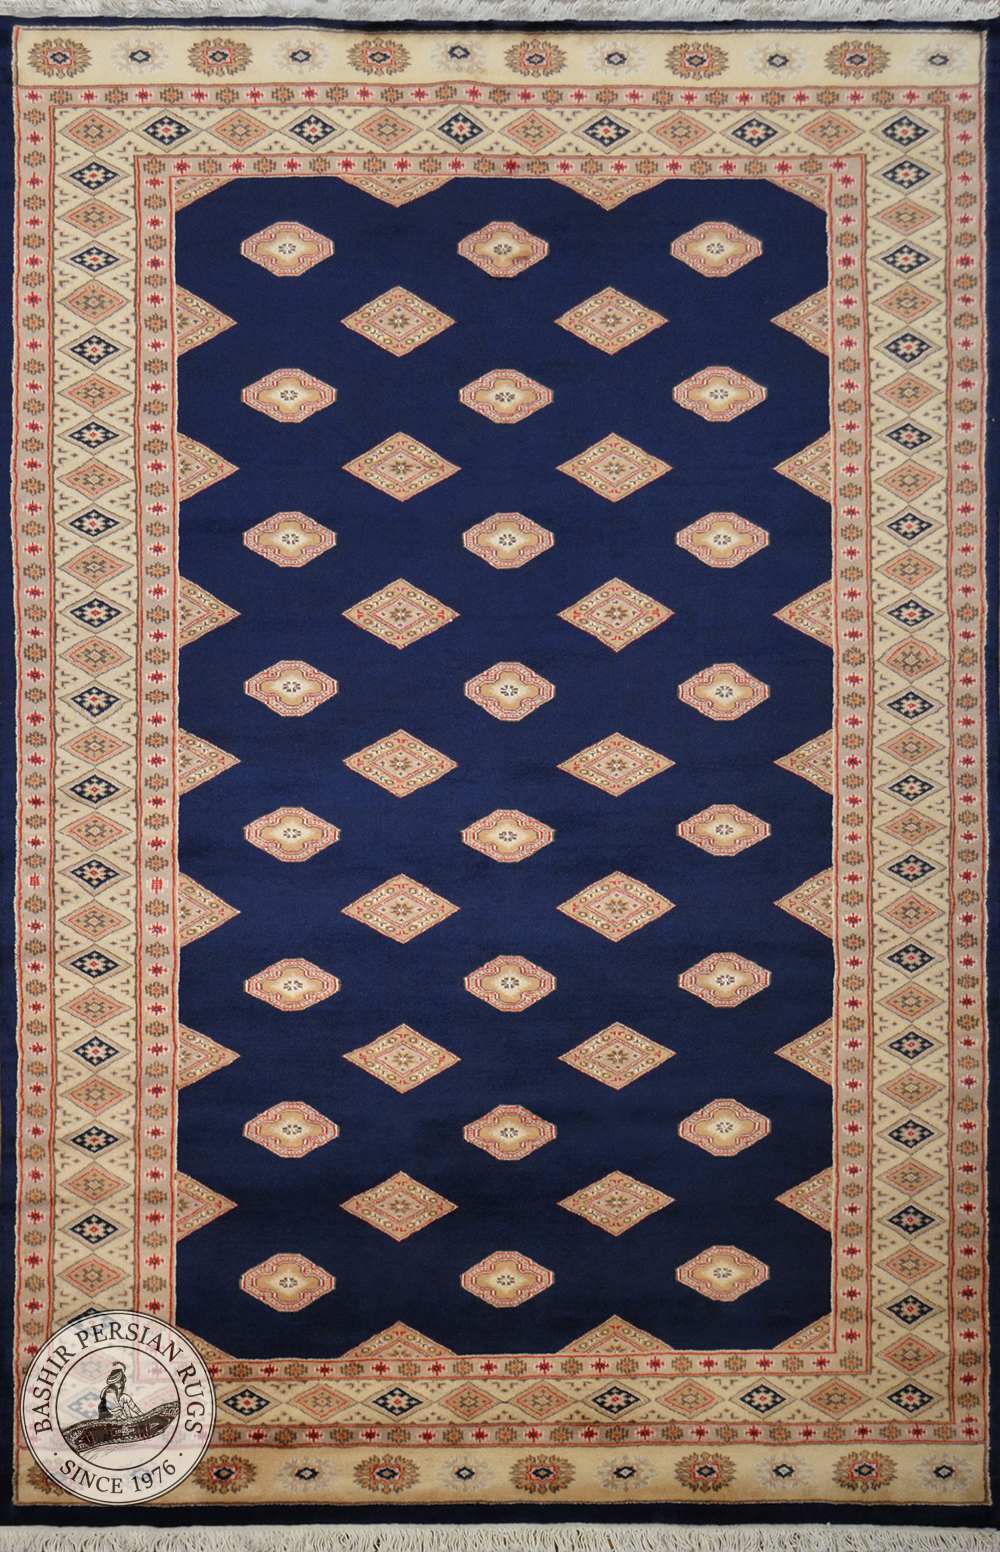 A hand-knotted Pakistani area rug called the Pende Bokhara and made of pure wool.